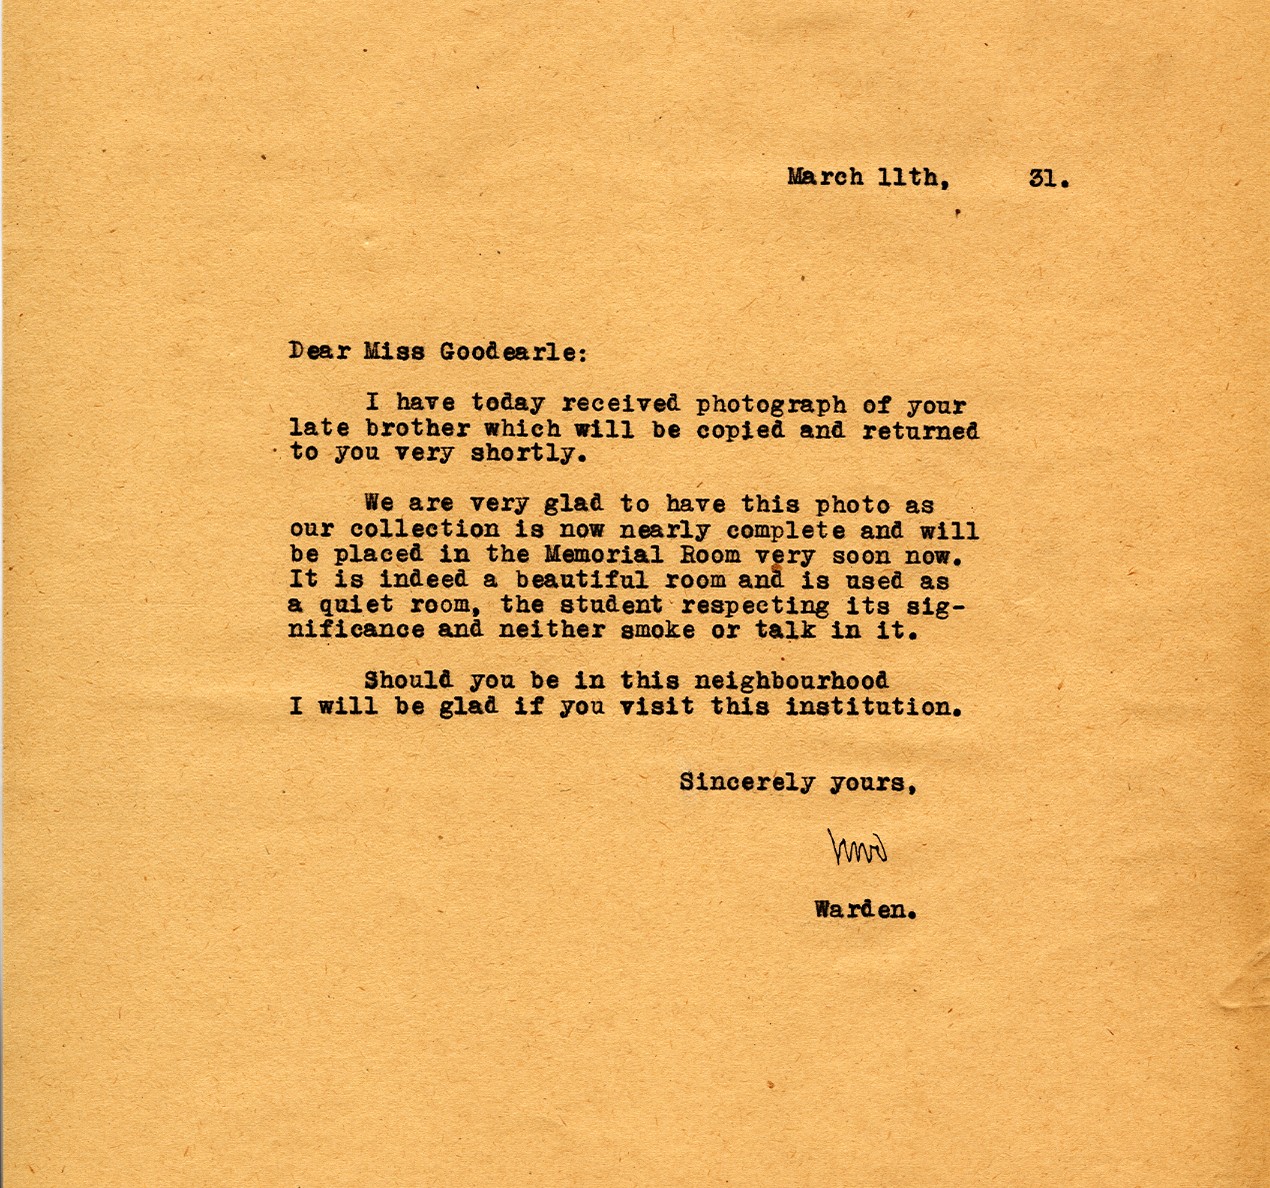 Letter from the Warden to Miss Goodearle, 11th March 1931